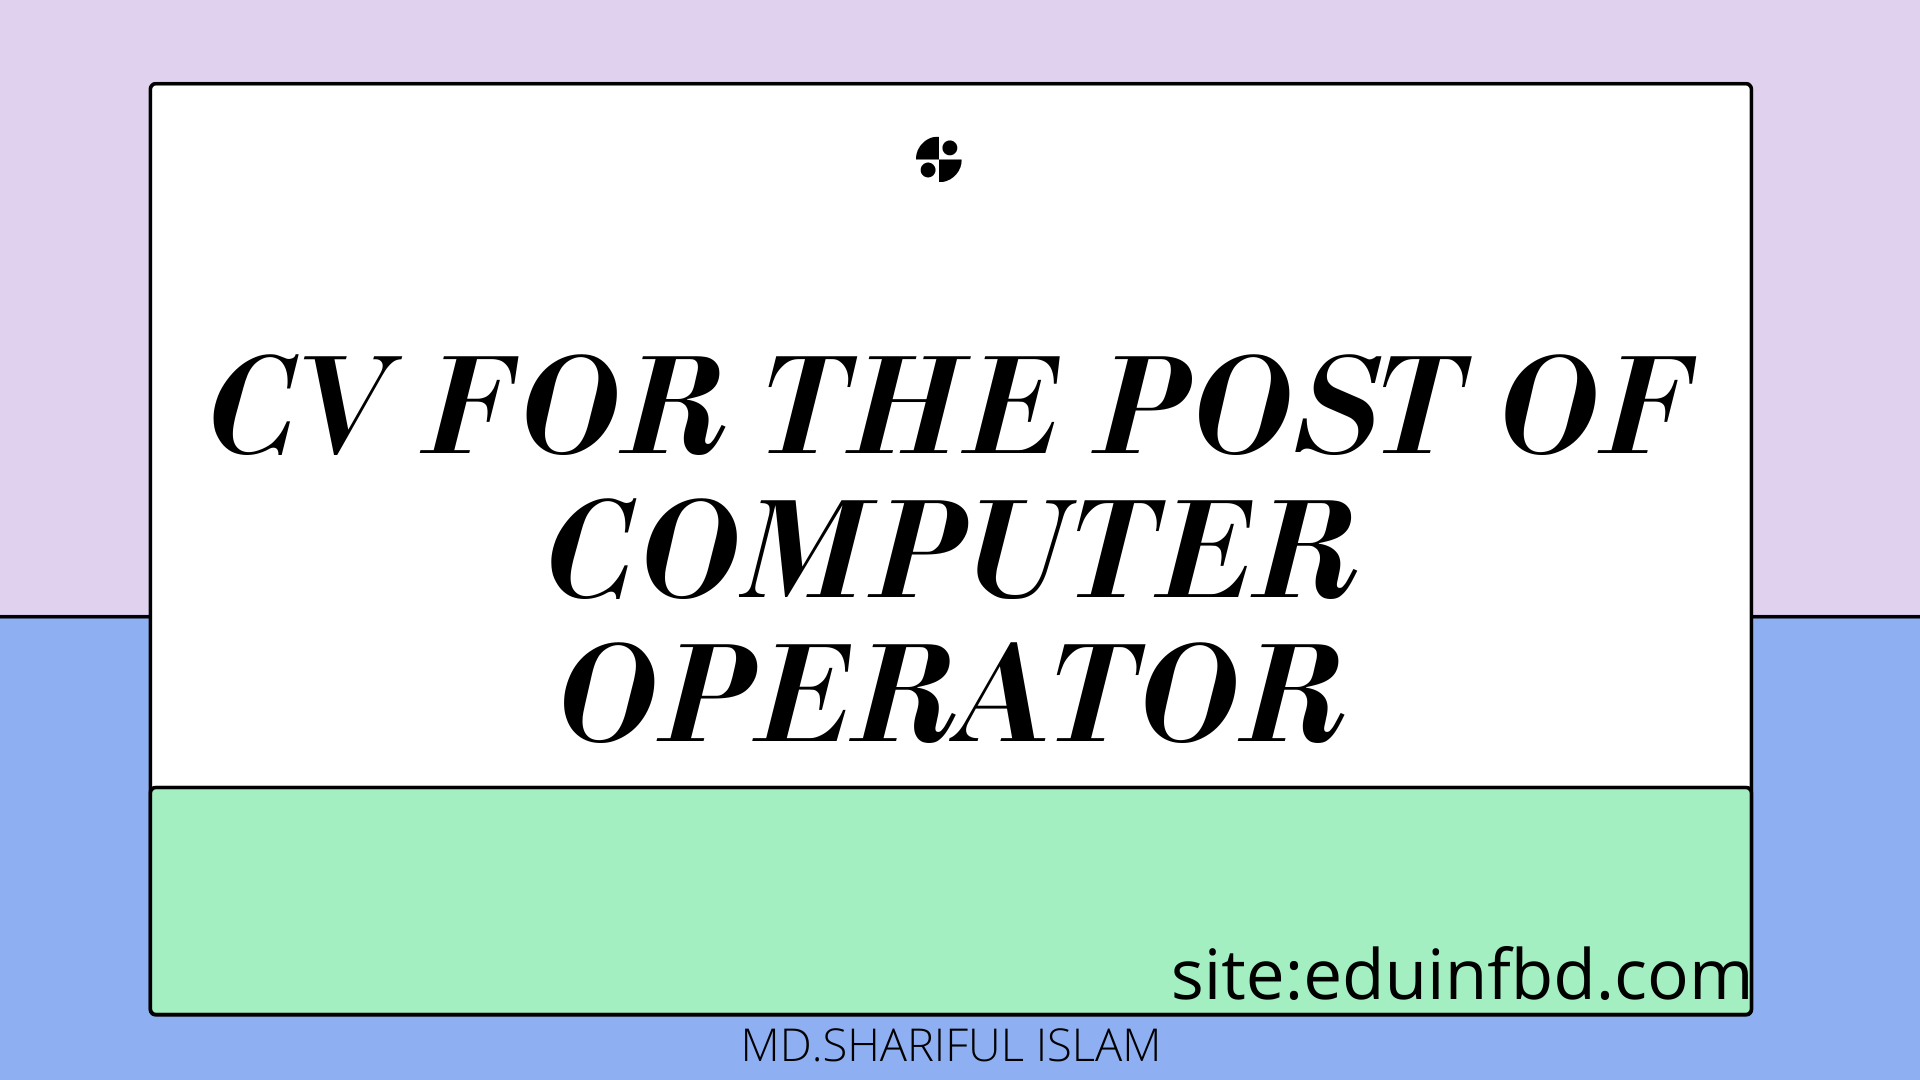 CV for the post of Computer Operator